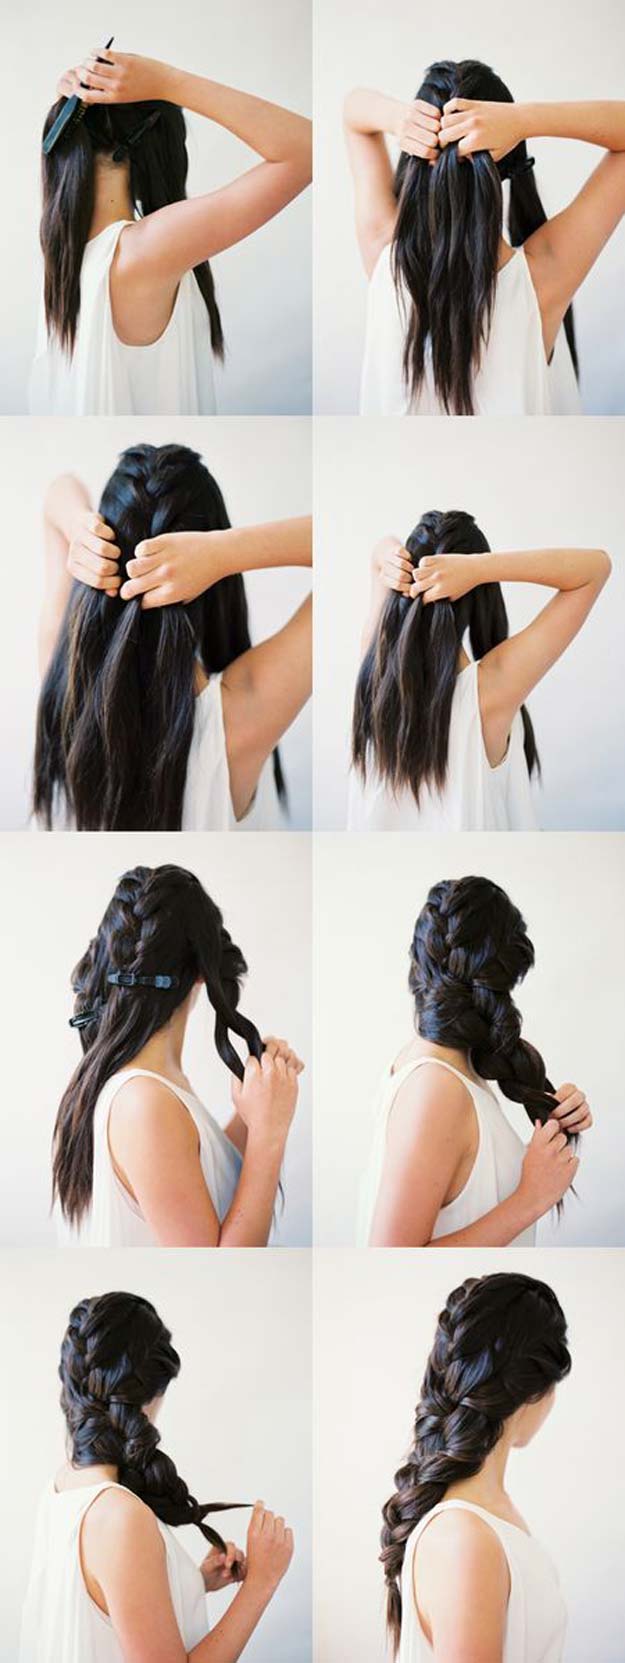 Cool and Easy DIY Hairstyles - Stylish Braids - Quick and Easy Ideas for Back to School Styles for Medium, Short and Long Hair - Fun Tips and Best Step by Step Tutorials for Teens, Prom, Weddings, Special Occasions and Work. Up dos, Braids, Top Knots and Buns, Super Summer Looks http://diyprojectsforteens.com/diy-cool-easy-hairstyles